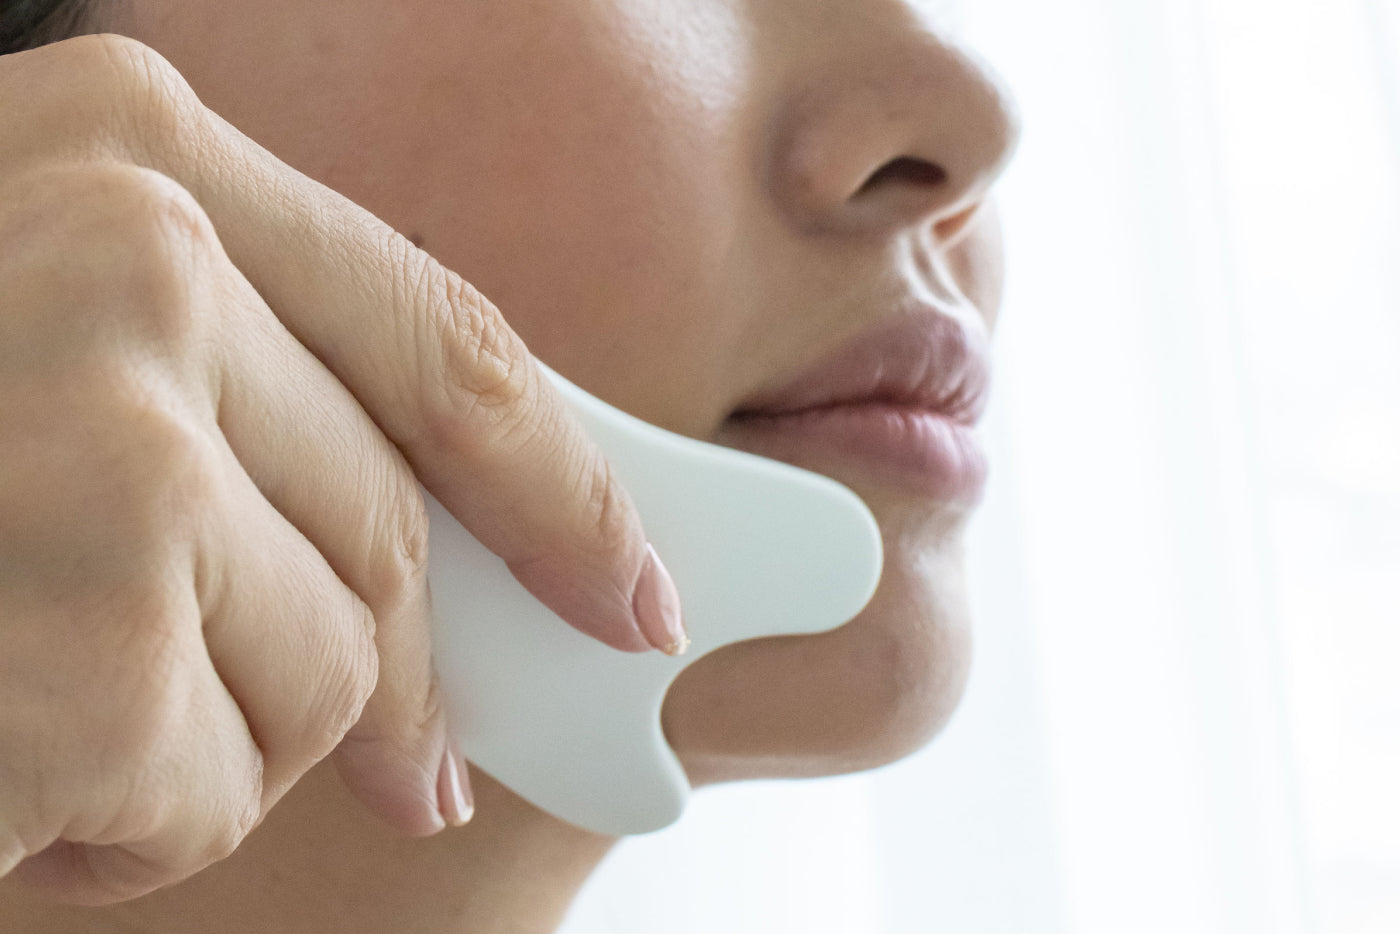 Gua sha: Uses, benefits, and side effects